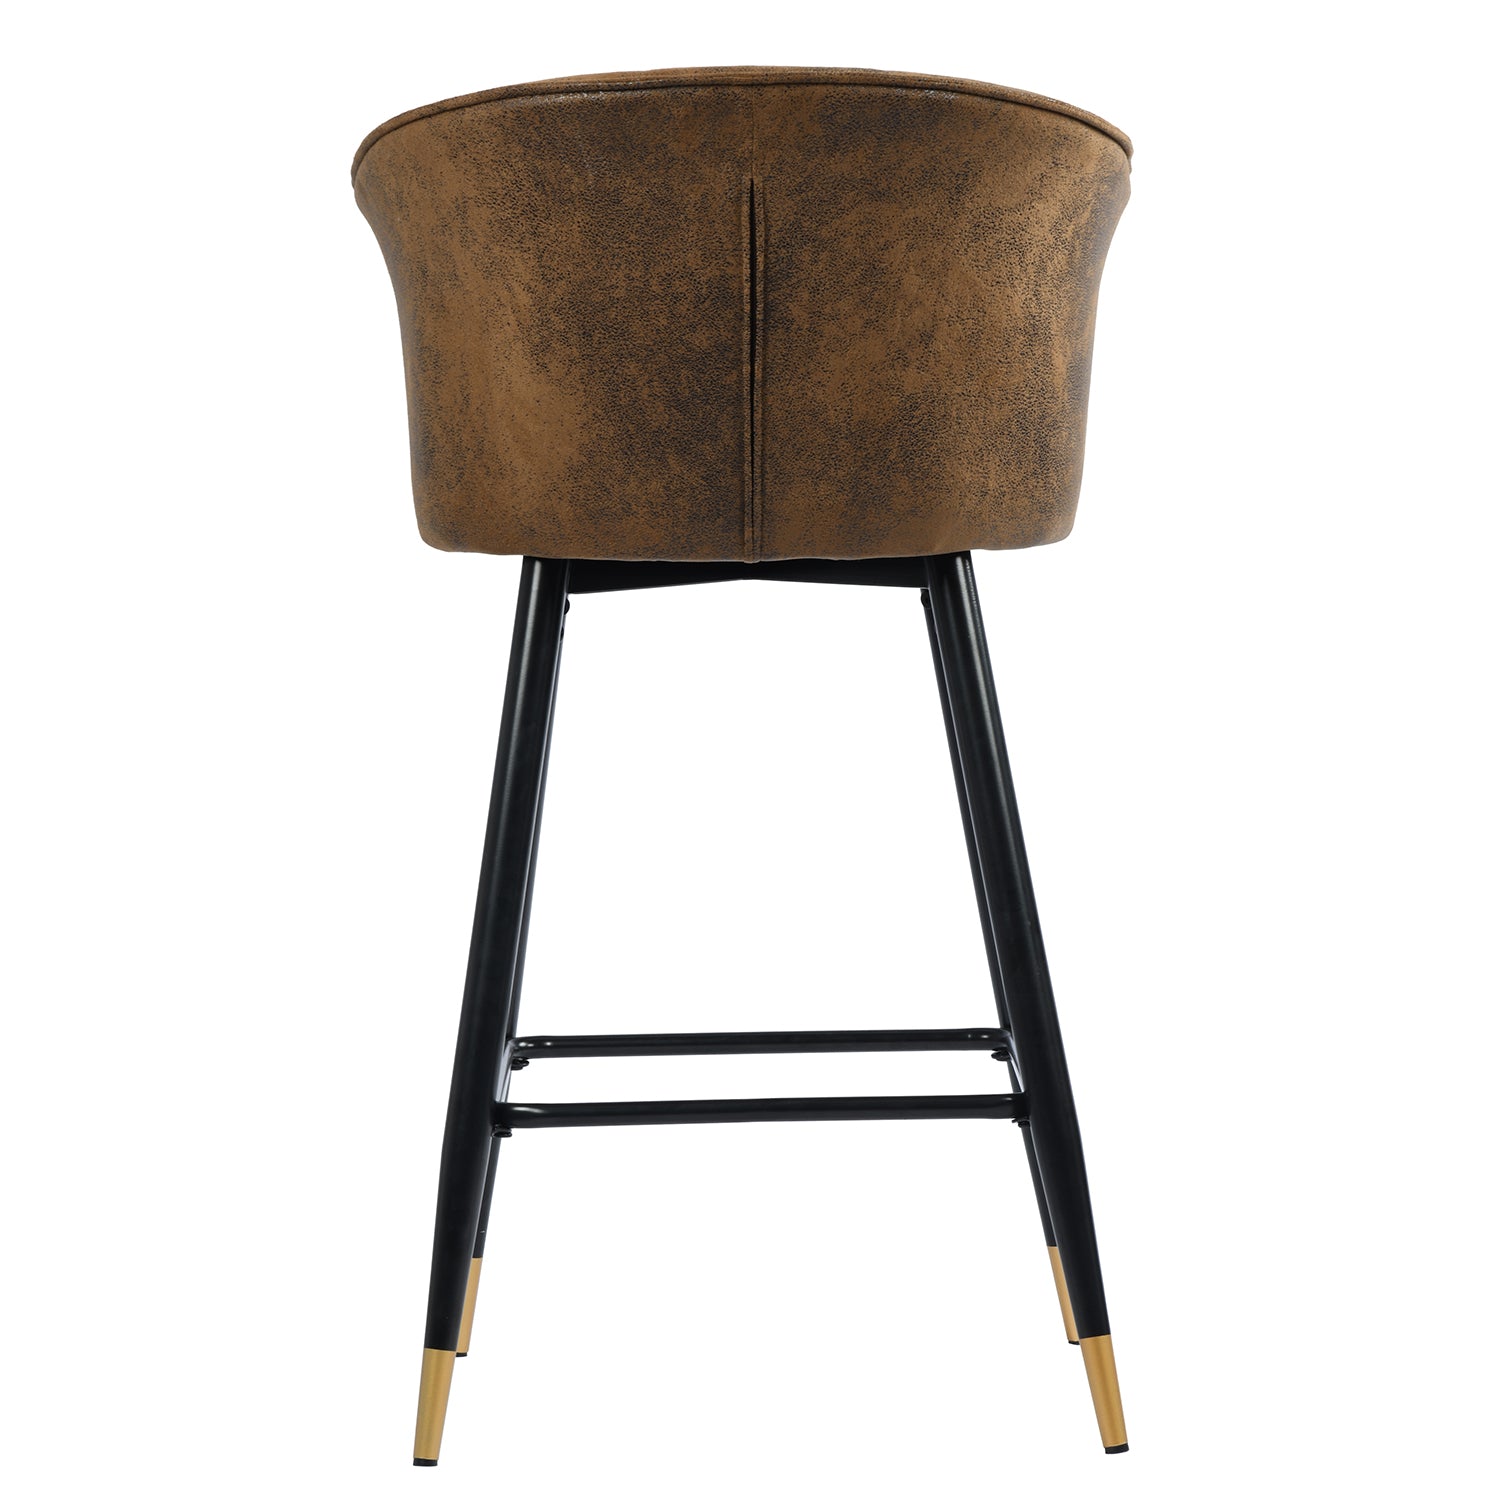 Doncic Suede Brown Bar Stool